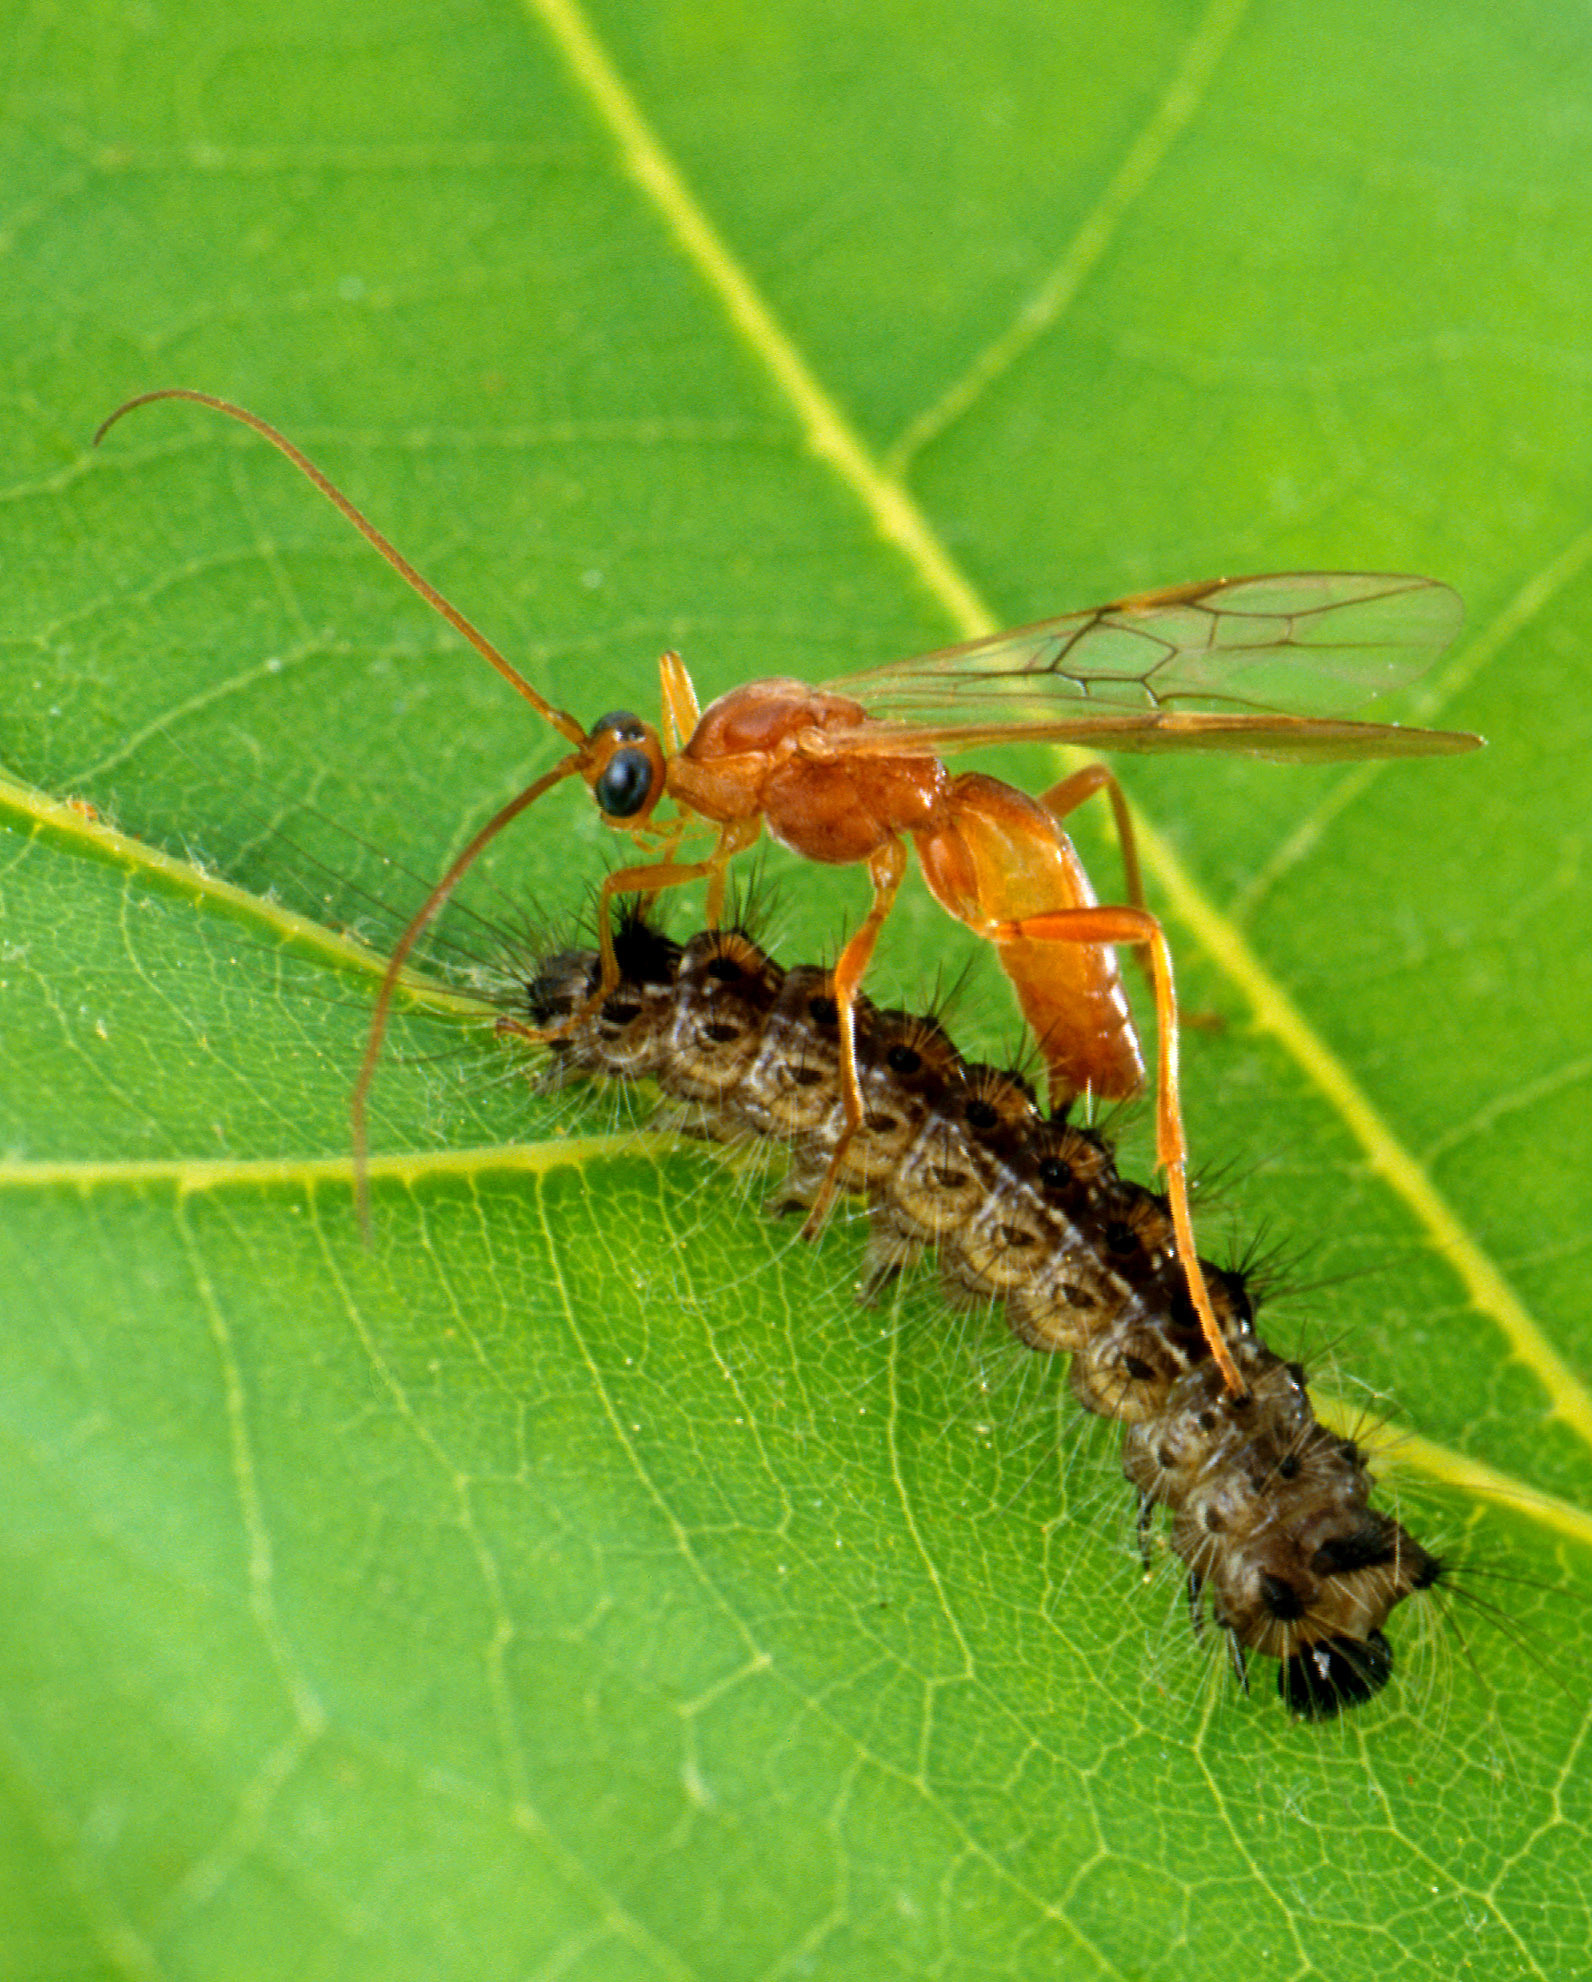 A bright orange wasp perches atop a brownish caterpillar with some bristly, dark hairs, on a green leaf.